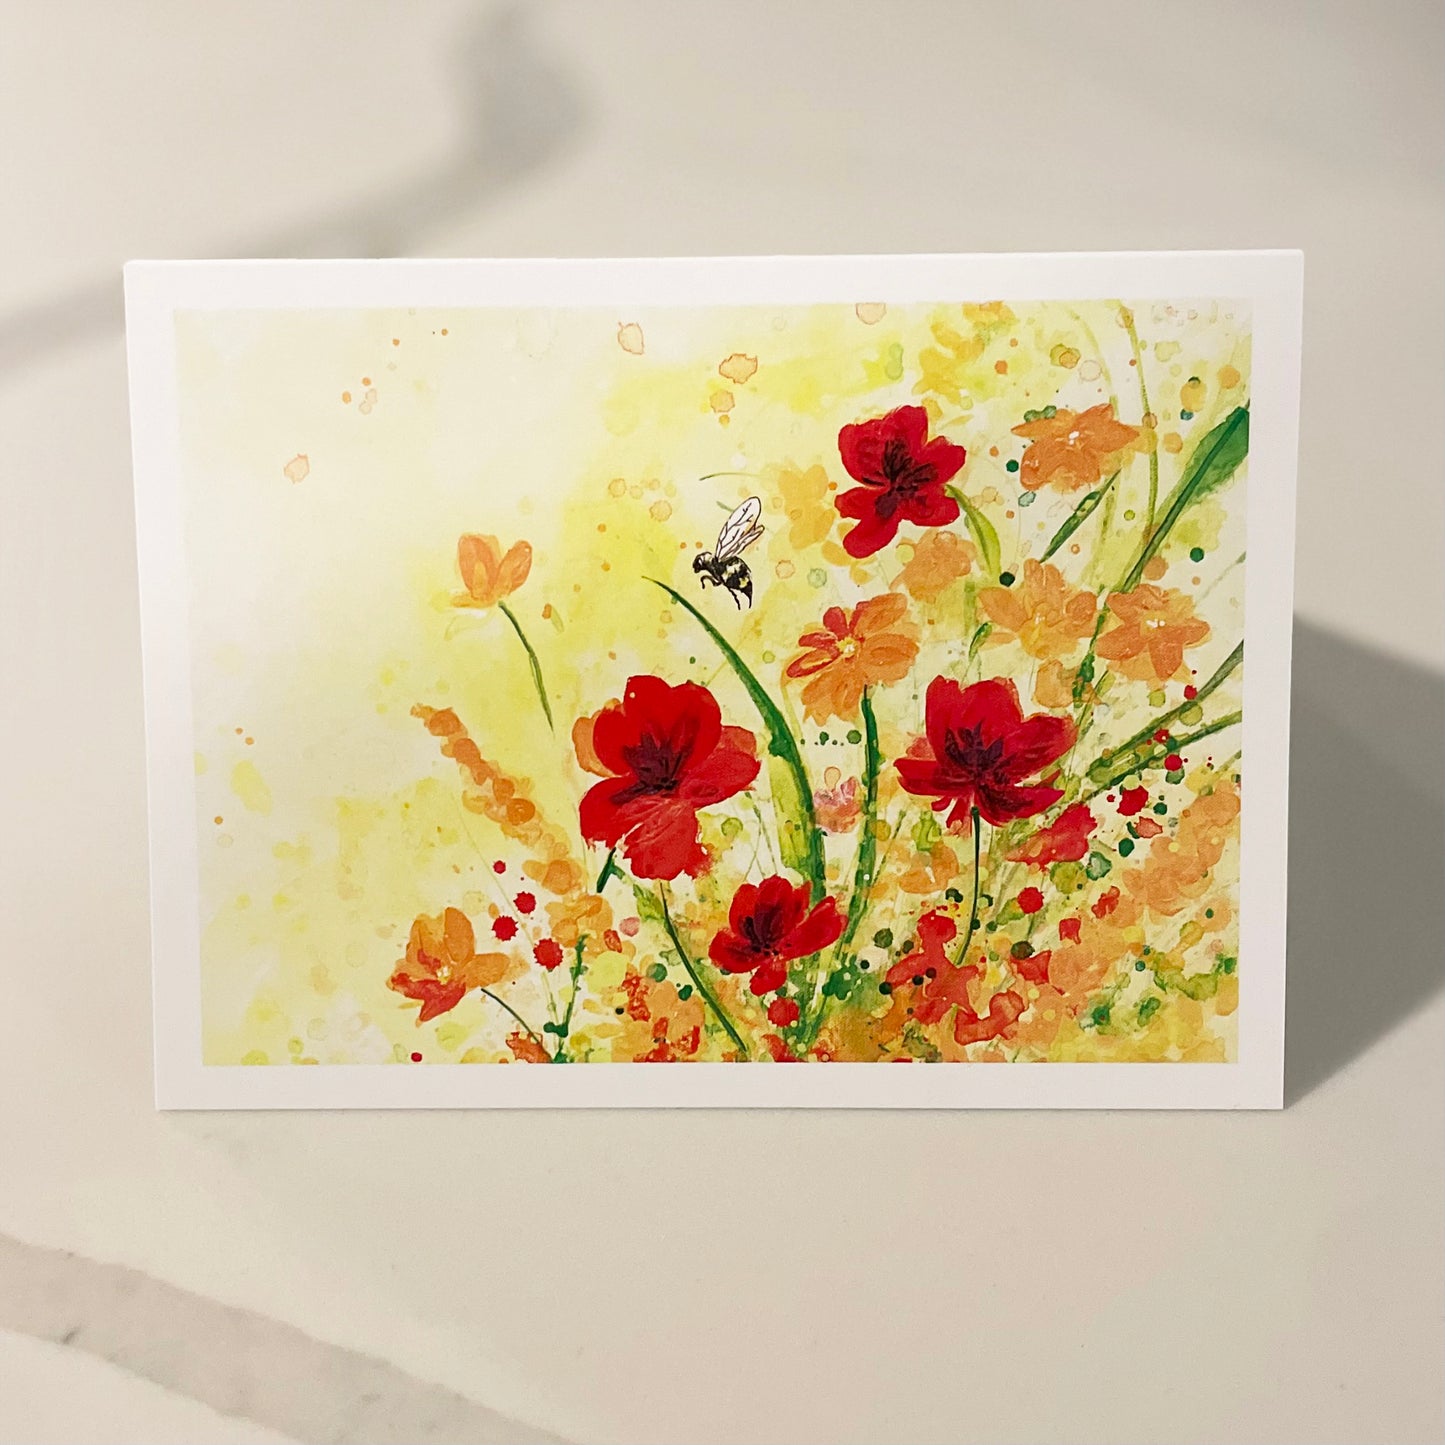 "Harvesting Hope" Greeting Card Gift Set (Includes six, 6x4" Cards and Envelopes)